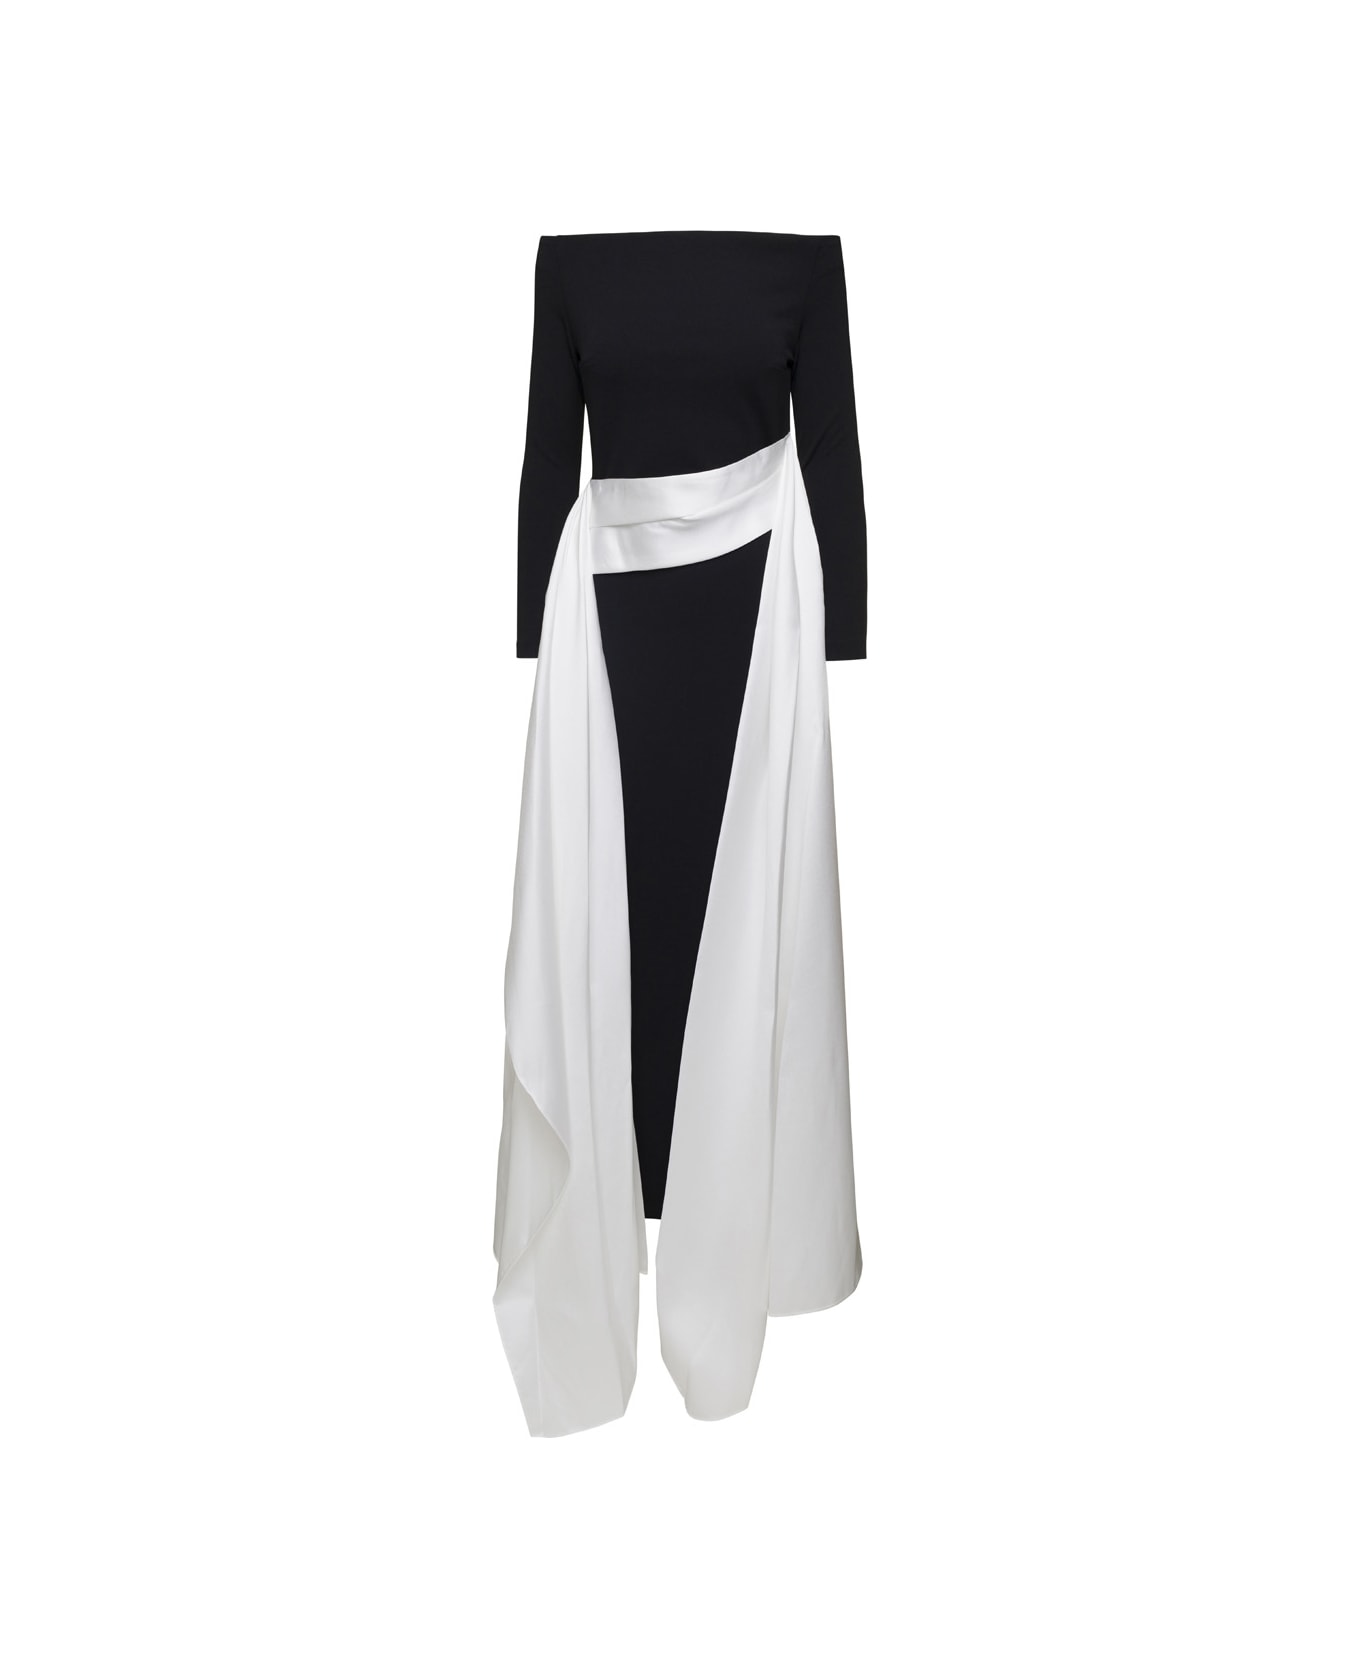 Solace London Black And White Long Dress With Train In Techno Fabric Stretch Woman - Black